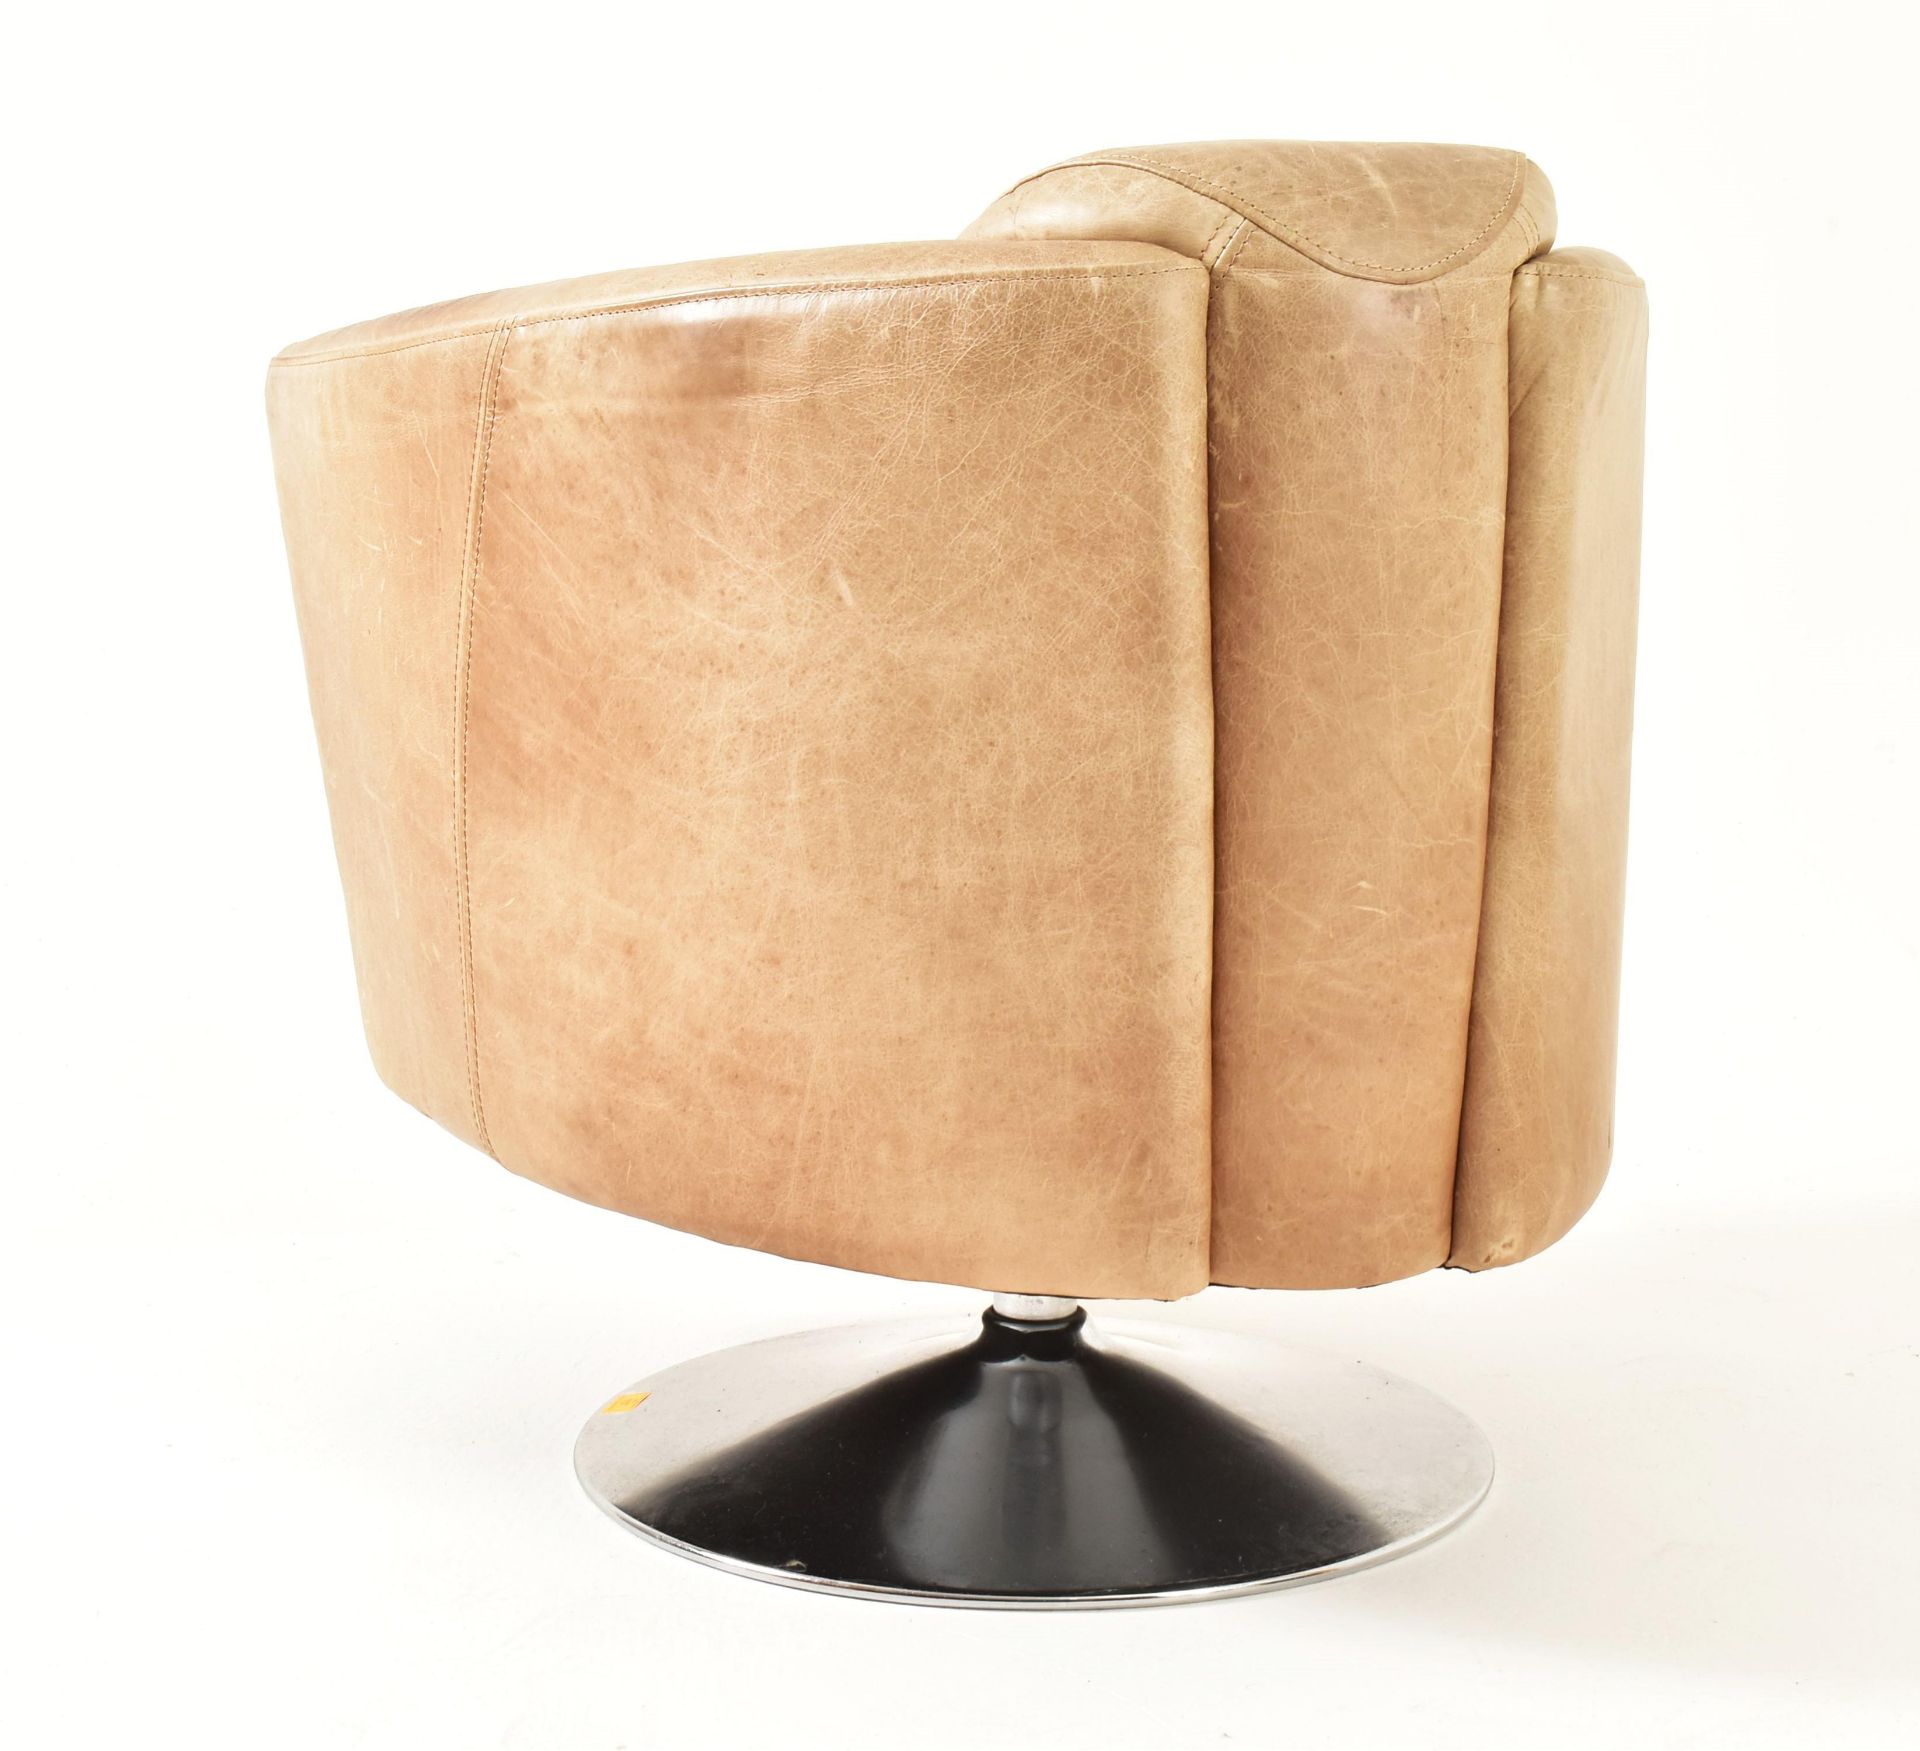 HALO - VINTAGE BROWN LEATHER AVIATOR TUB SWIVEL CHAIR - Image 4 of 4